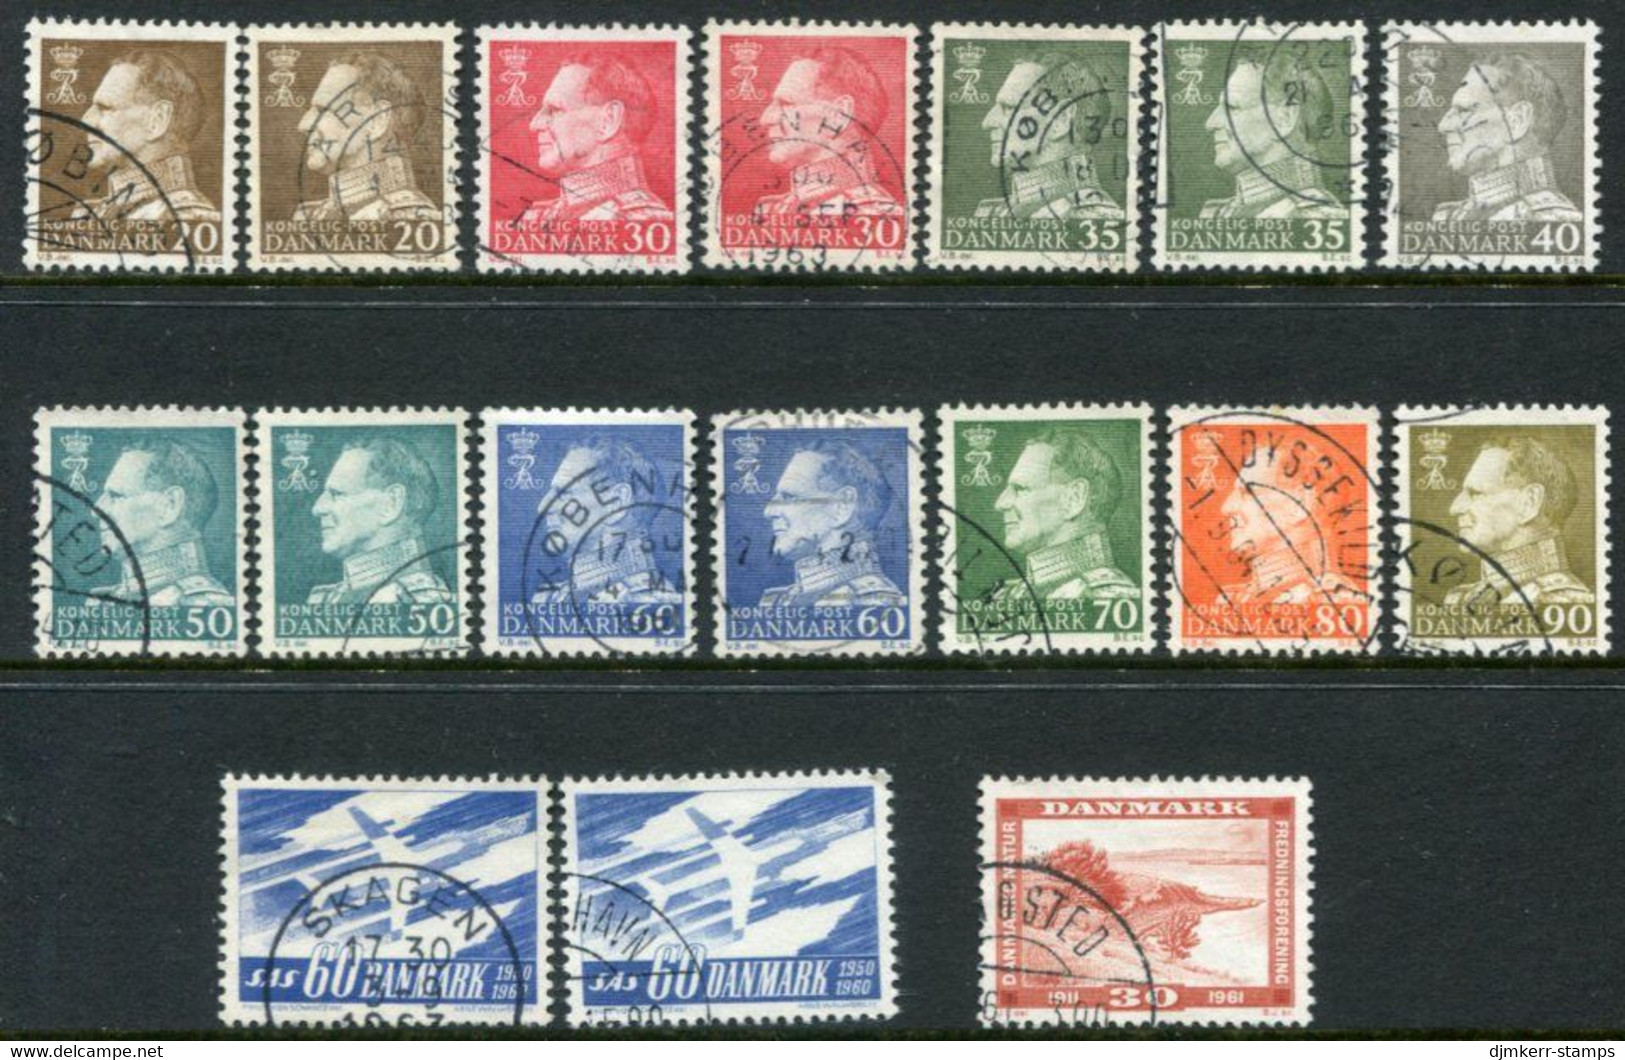 DENMARK 1961 Complete Issues With Ordinary And Fluorescent Papers, Used Michel 388-98 - Oblitérés